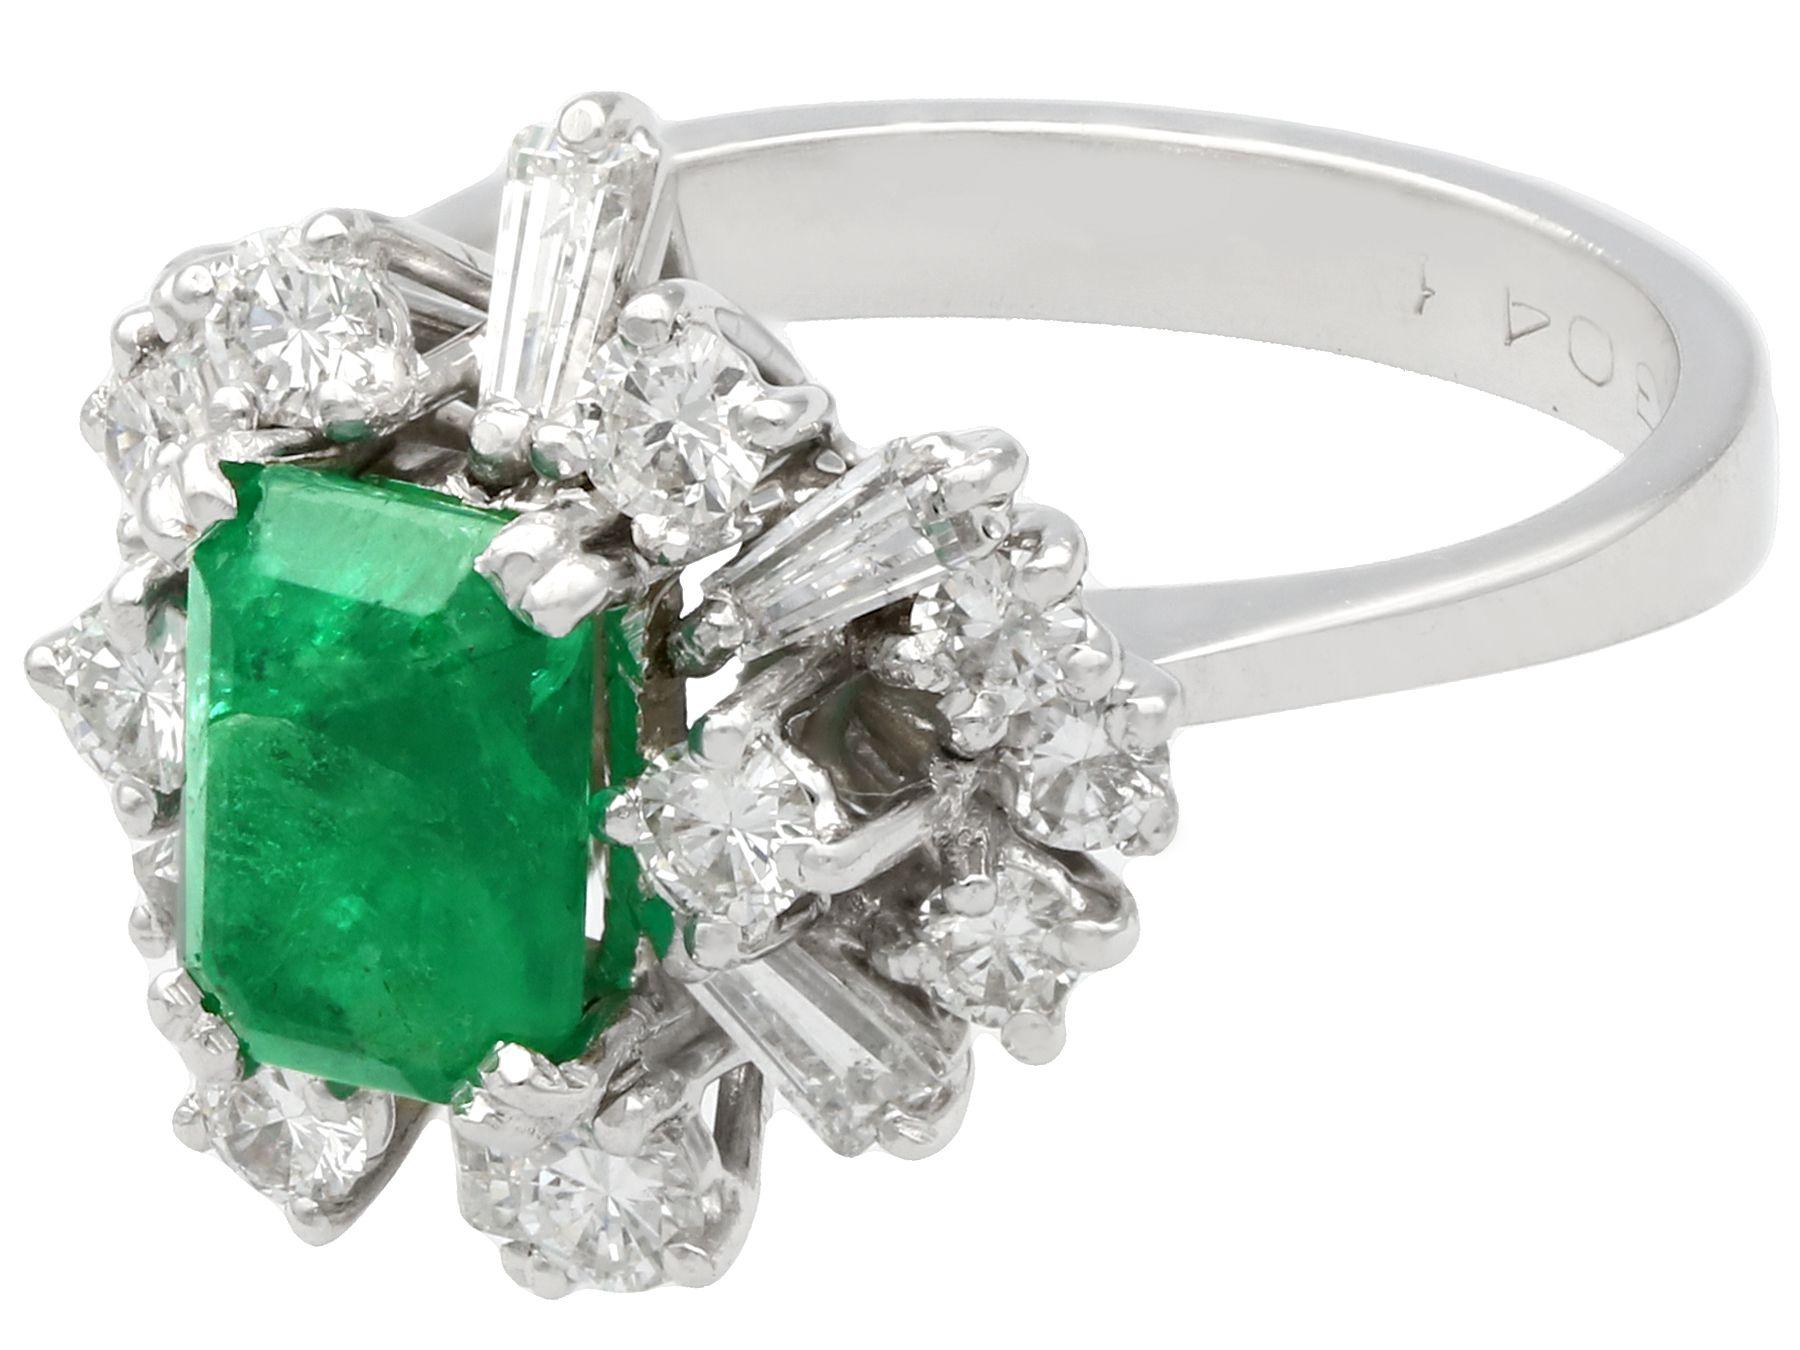 Baguette Cut Vintage 1.48 Carat Emerald and 1.08 Carat Diamond White Gold Cluster Ring